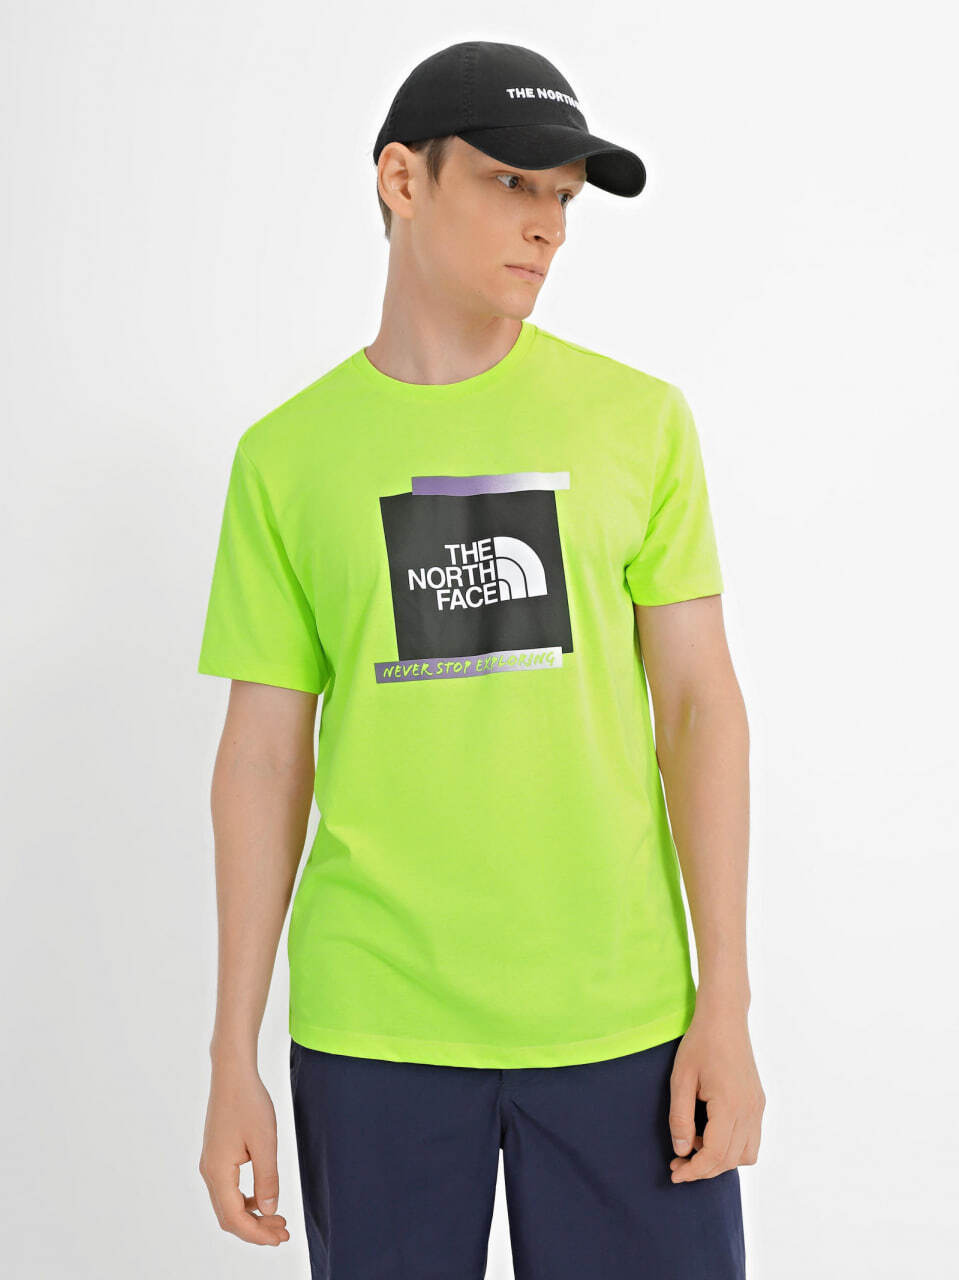 The North Face Graphic T-Shirt Green